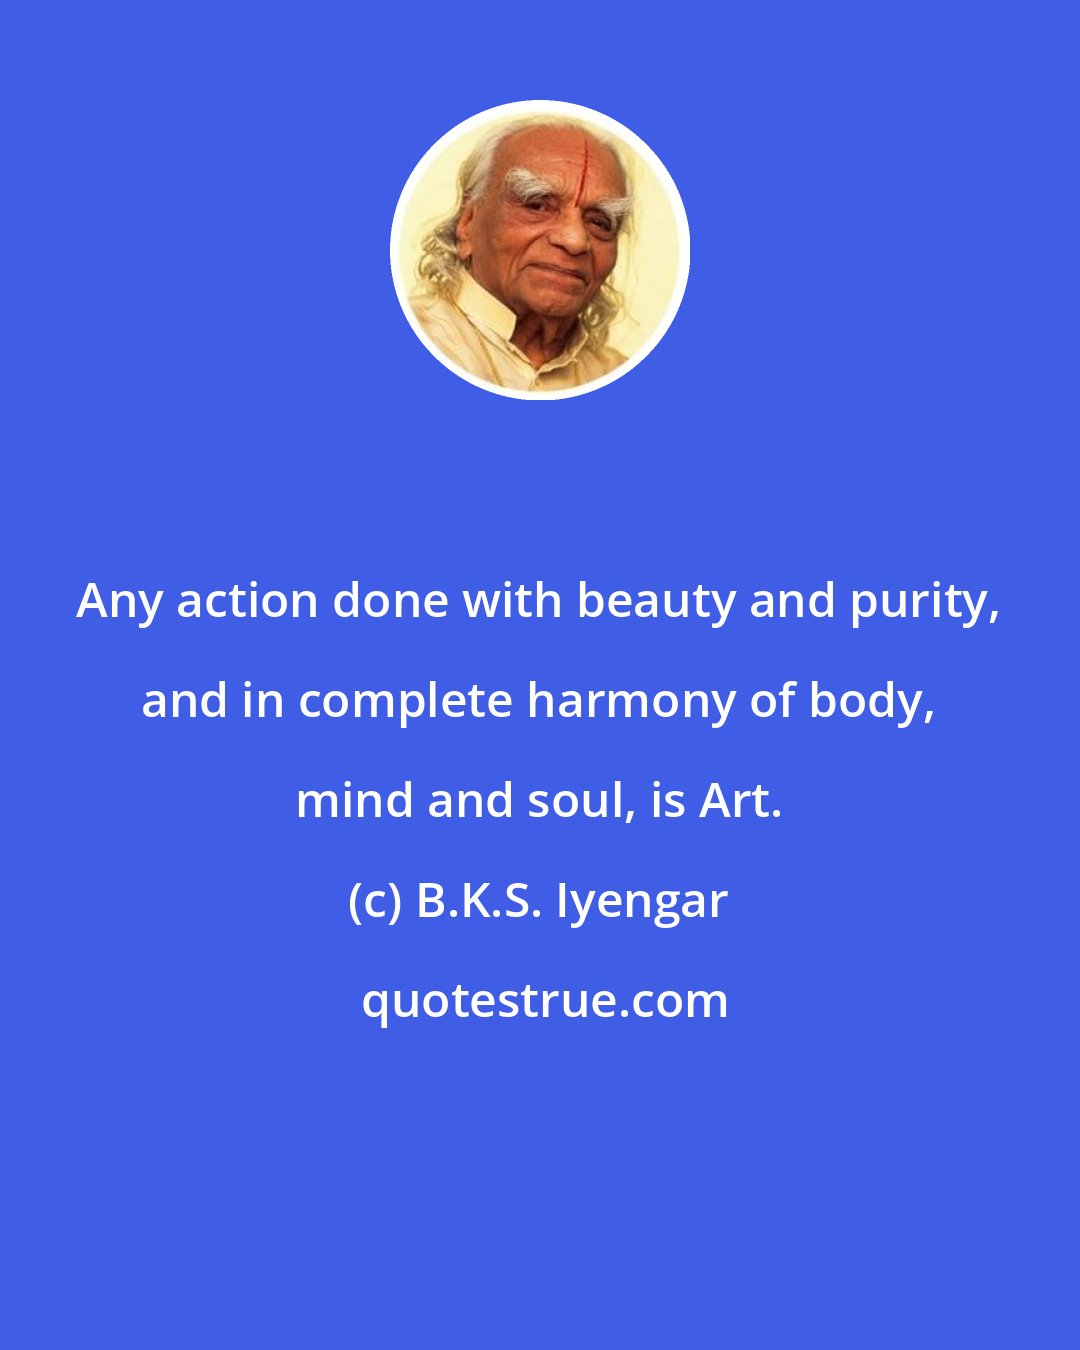 B.K.S. Iyengar: Any action done with beauty and purity, and in complete harmony of body, mind and soul, is Art.